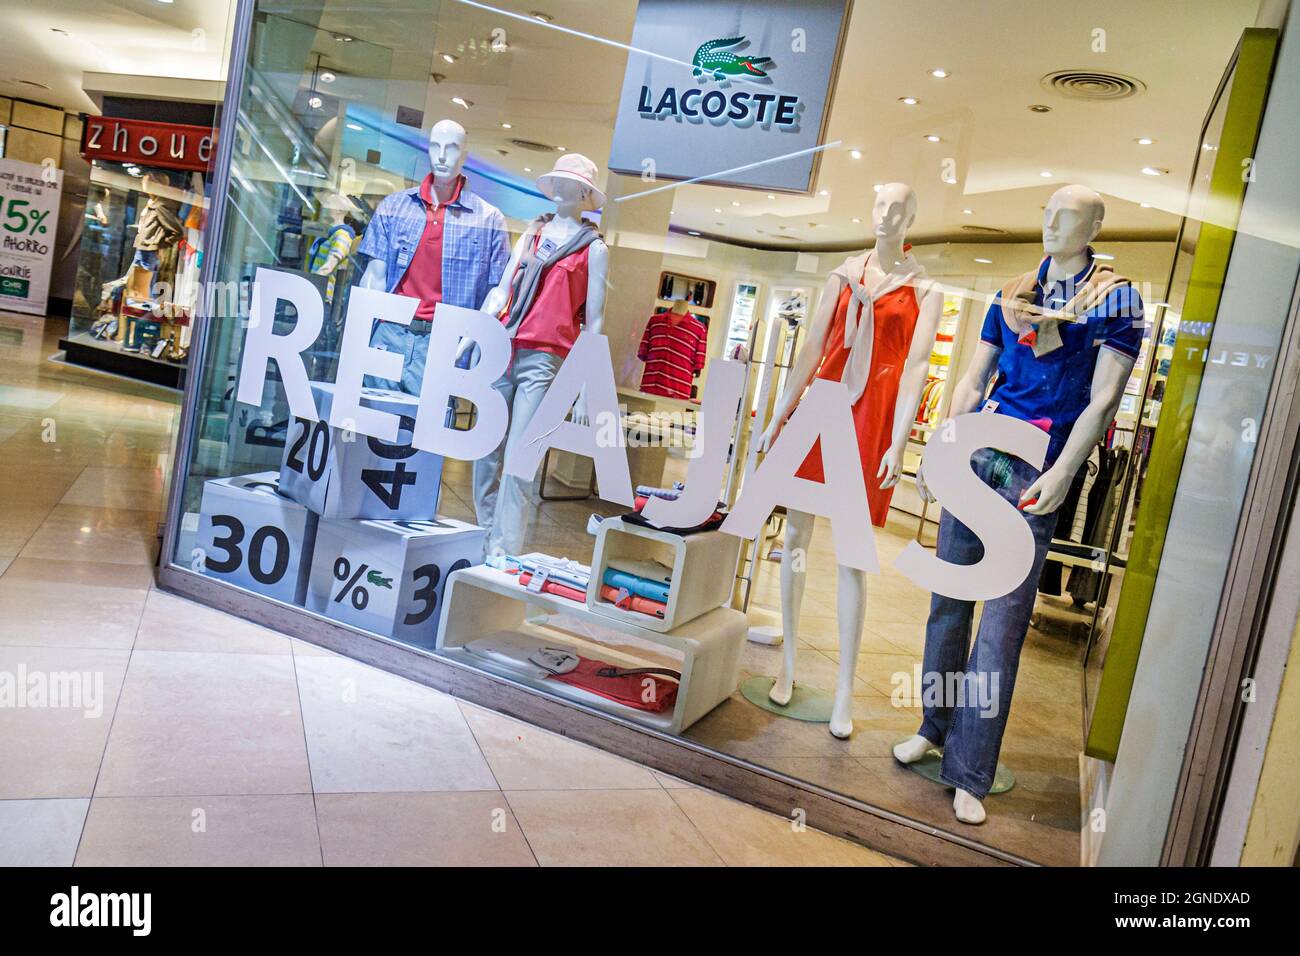 Page 3 - Lacoste Store High Resolution Stock Photography and Images - Alamy